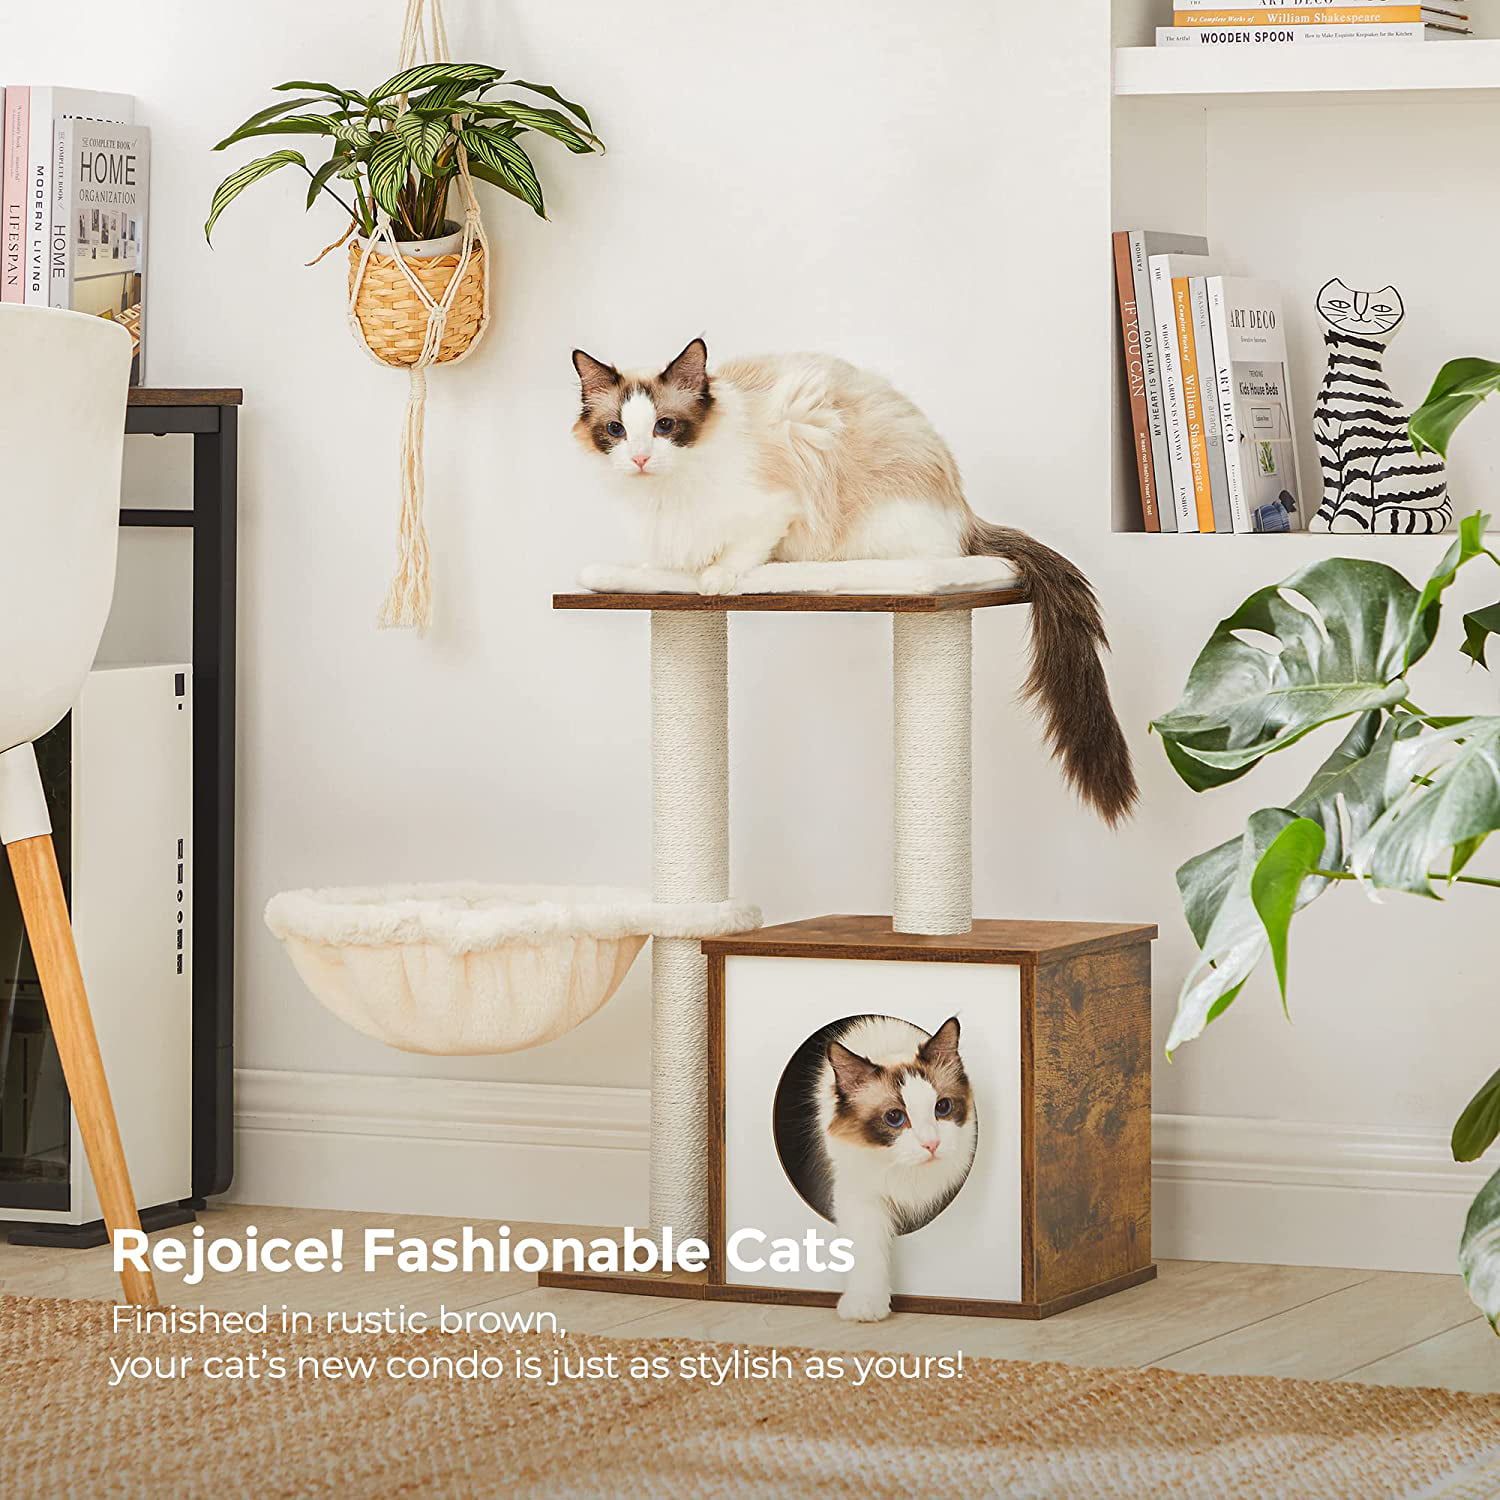 Rustic Brown UPCT122X01 Small Wooden Cat Condo with Scratching Posts Modern Cat Tower FEANDREA Cat Tree for Indoor Cats for Kittens Removable Washable Cushions 